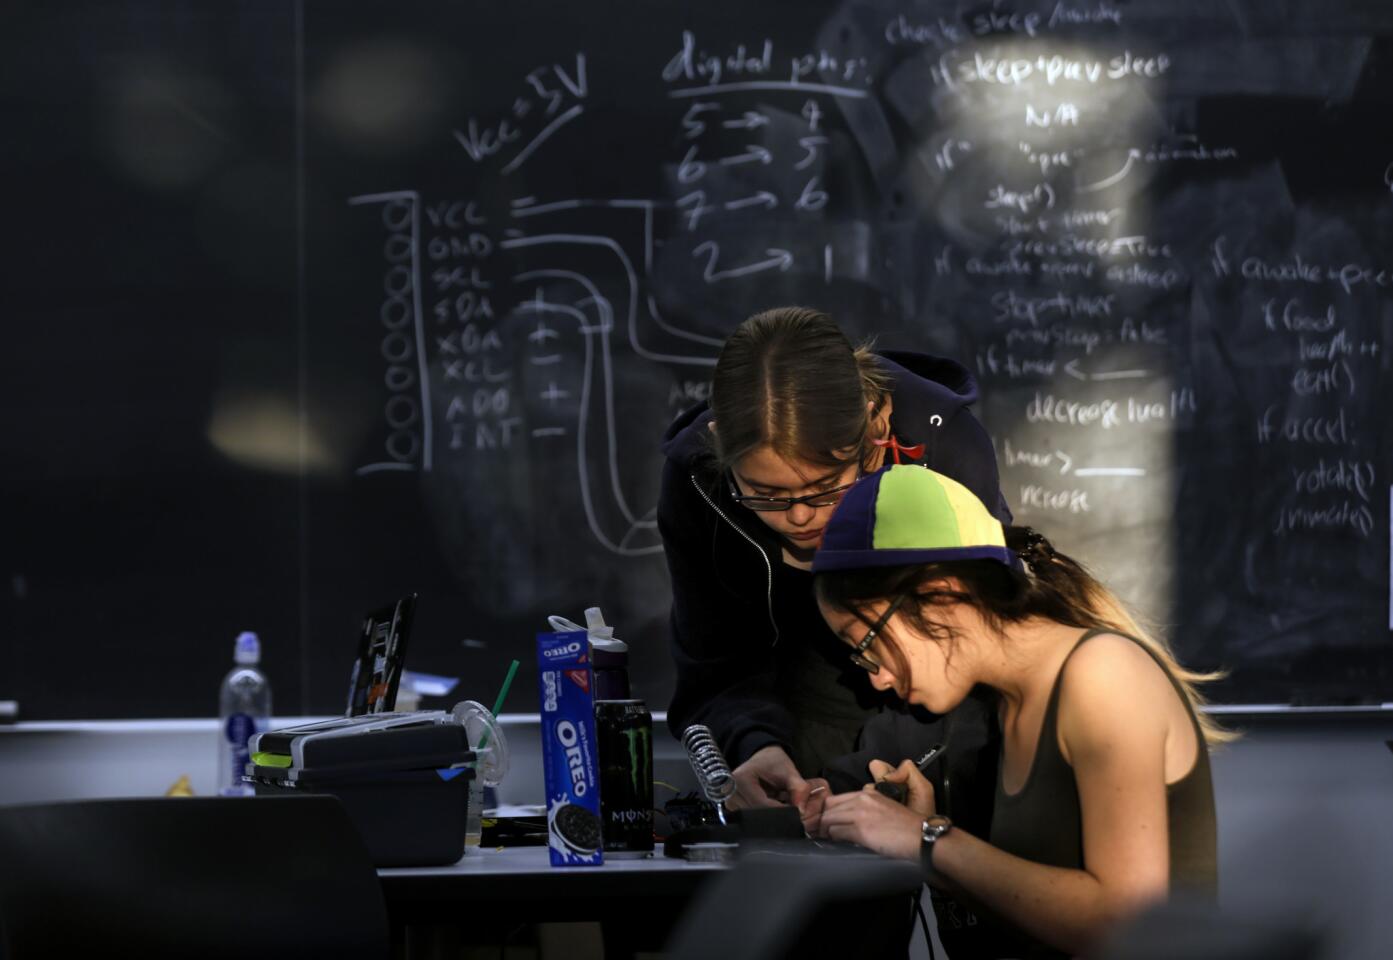 The morning sun hits Elizabeth Poss, 19, left, and Lauren Hu, 20, as they work on their "Sleep Dep Buddy" project at the MuddHacks, a Harvey Mudd College hardware hackathon, in October. The light-sensitive robot was designed to cause a ruckus if its owner doesn't turn off the light and go to bed to get enough sleep.